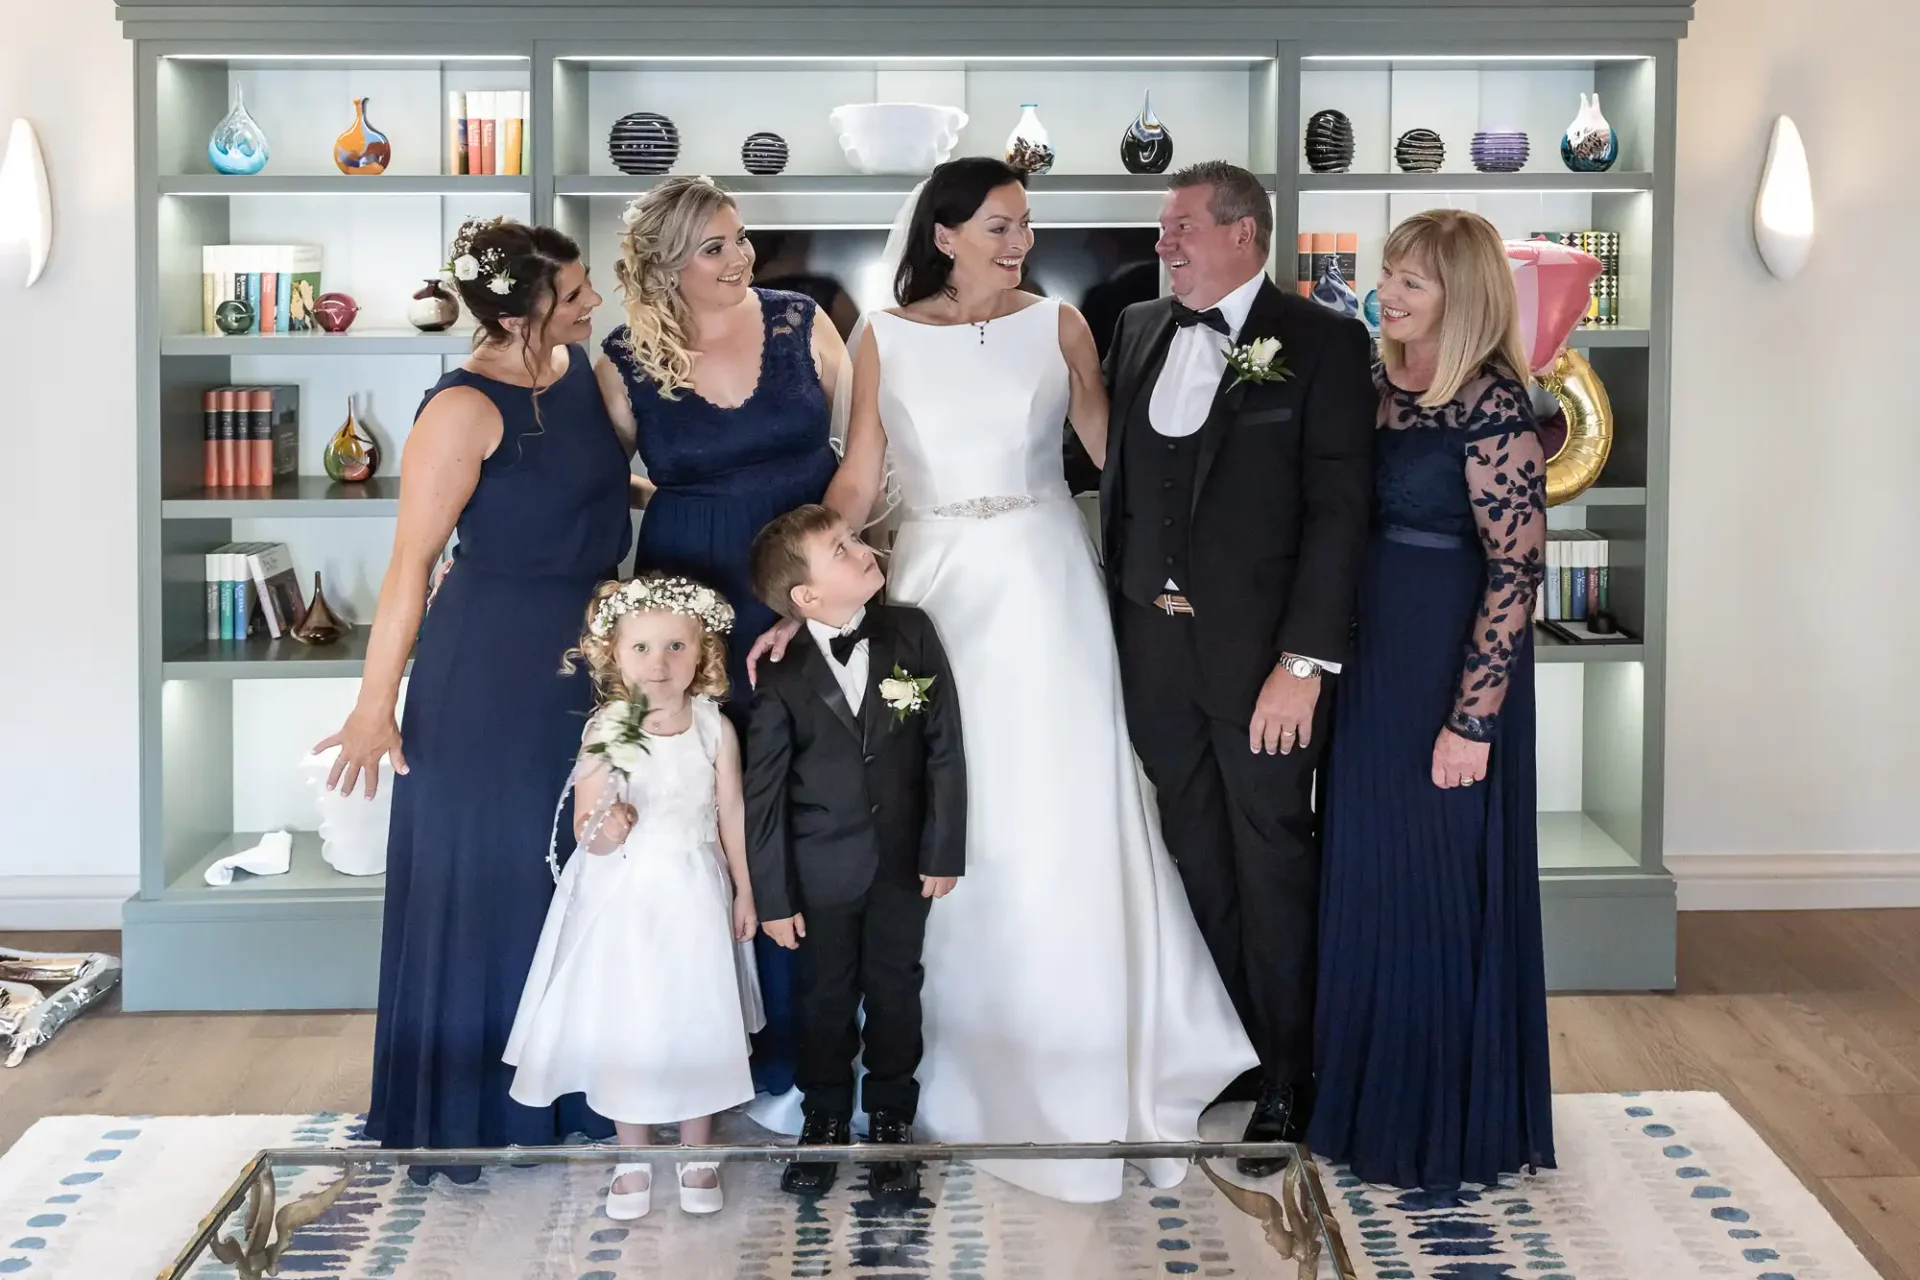 A joyful wedding group indoors, featuring two children in the center with adults in formal attire laughing around them.